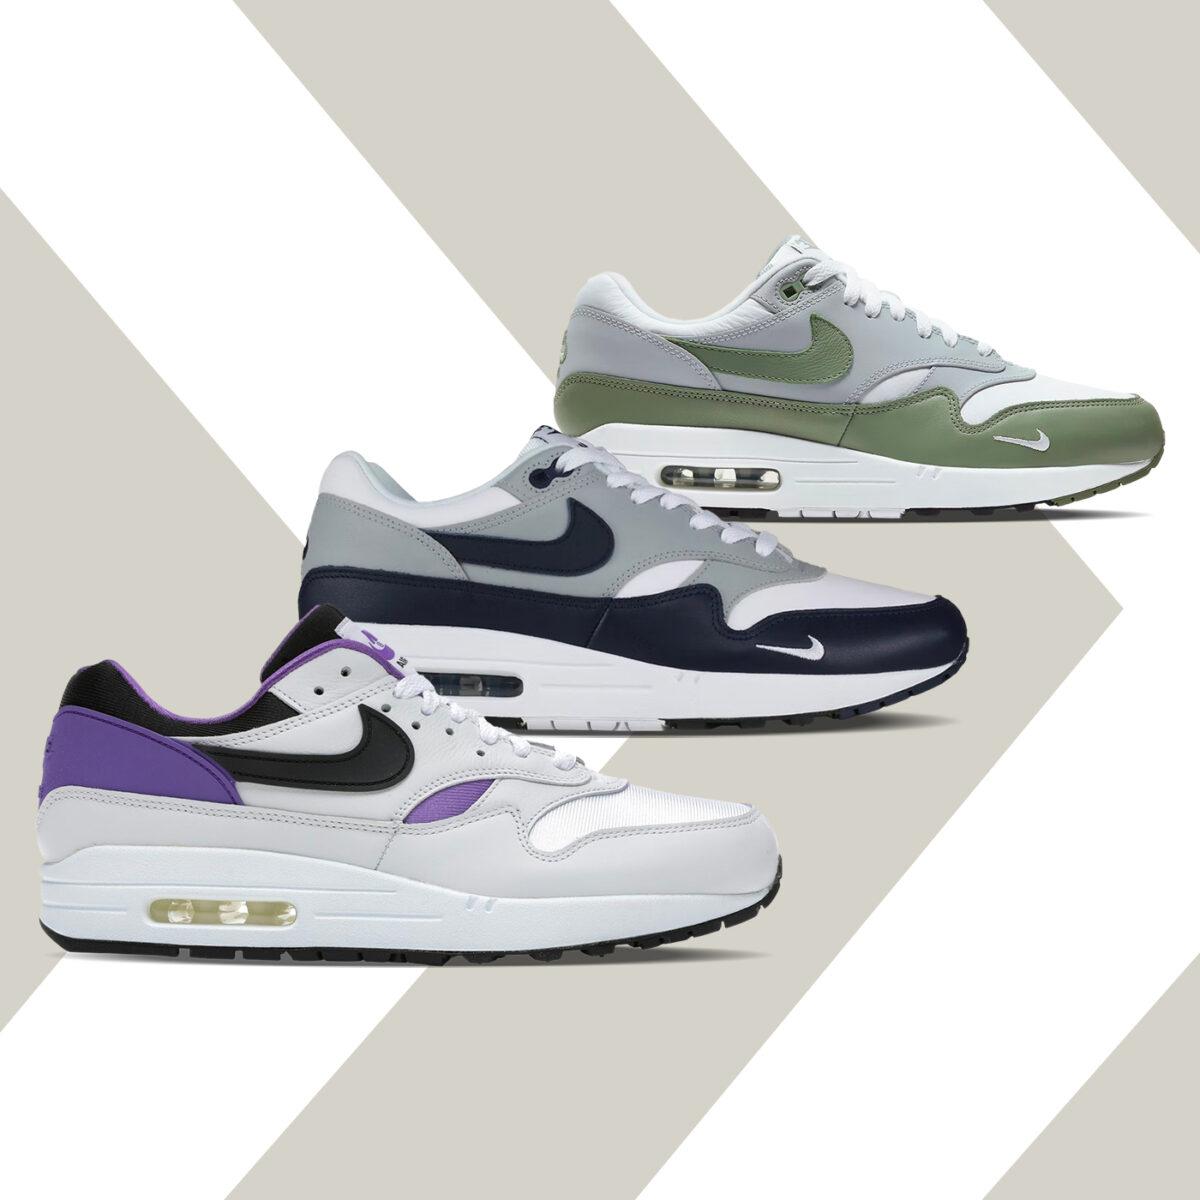 The Air Max 1 Big Bubble is back, this time in its original and